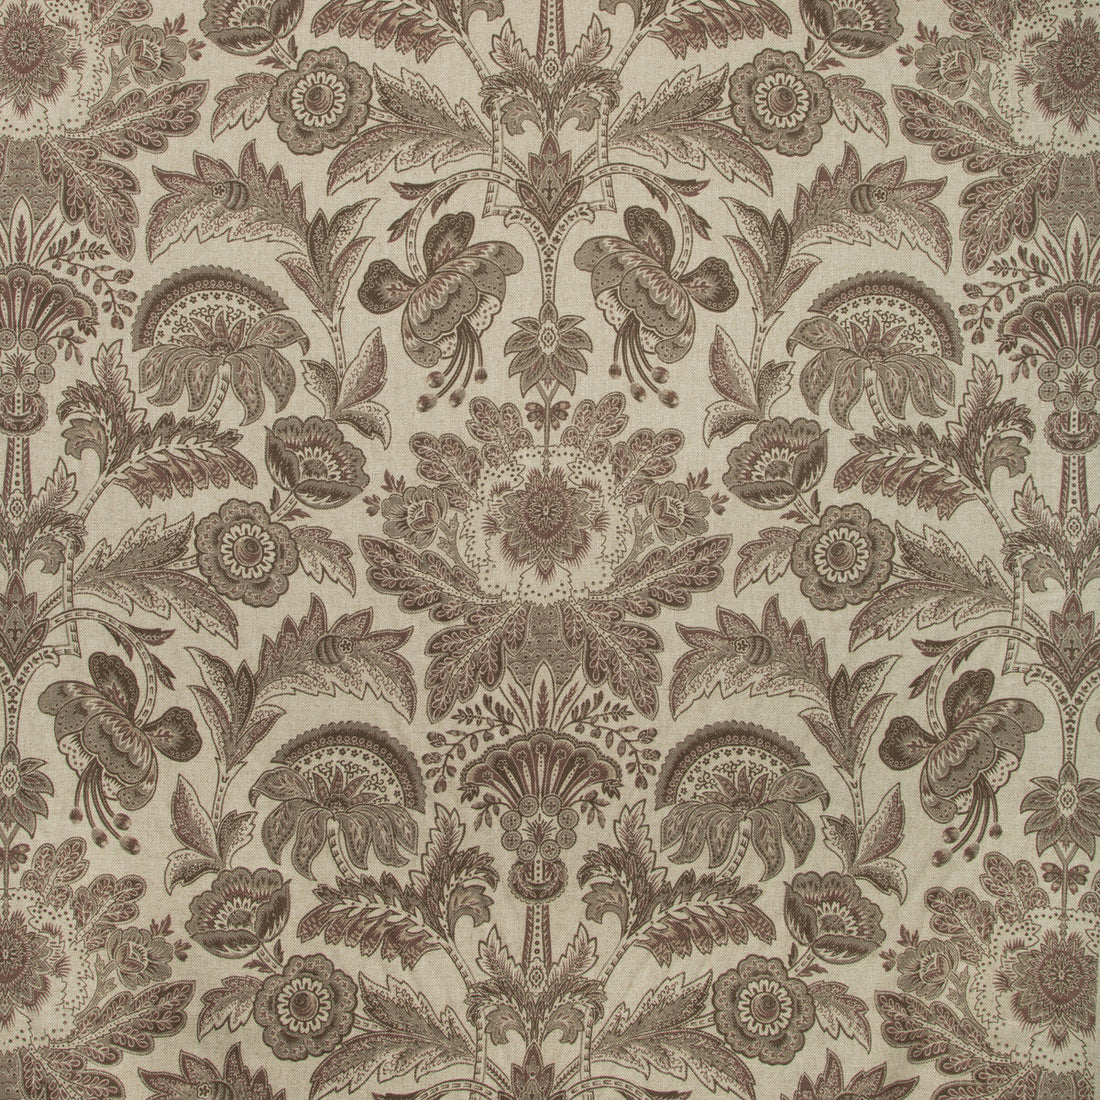 Kent Manor fabric in aubergine color - pattern KENT MANOR.10.0 - by Kravet Couture in the David Phoenix Well-Suited collection